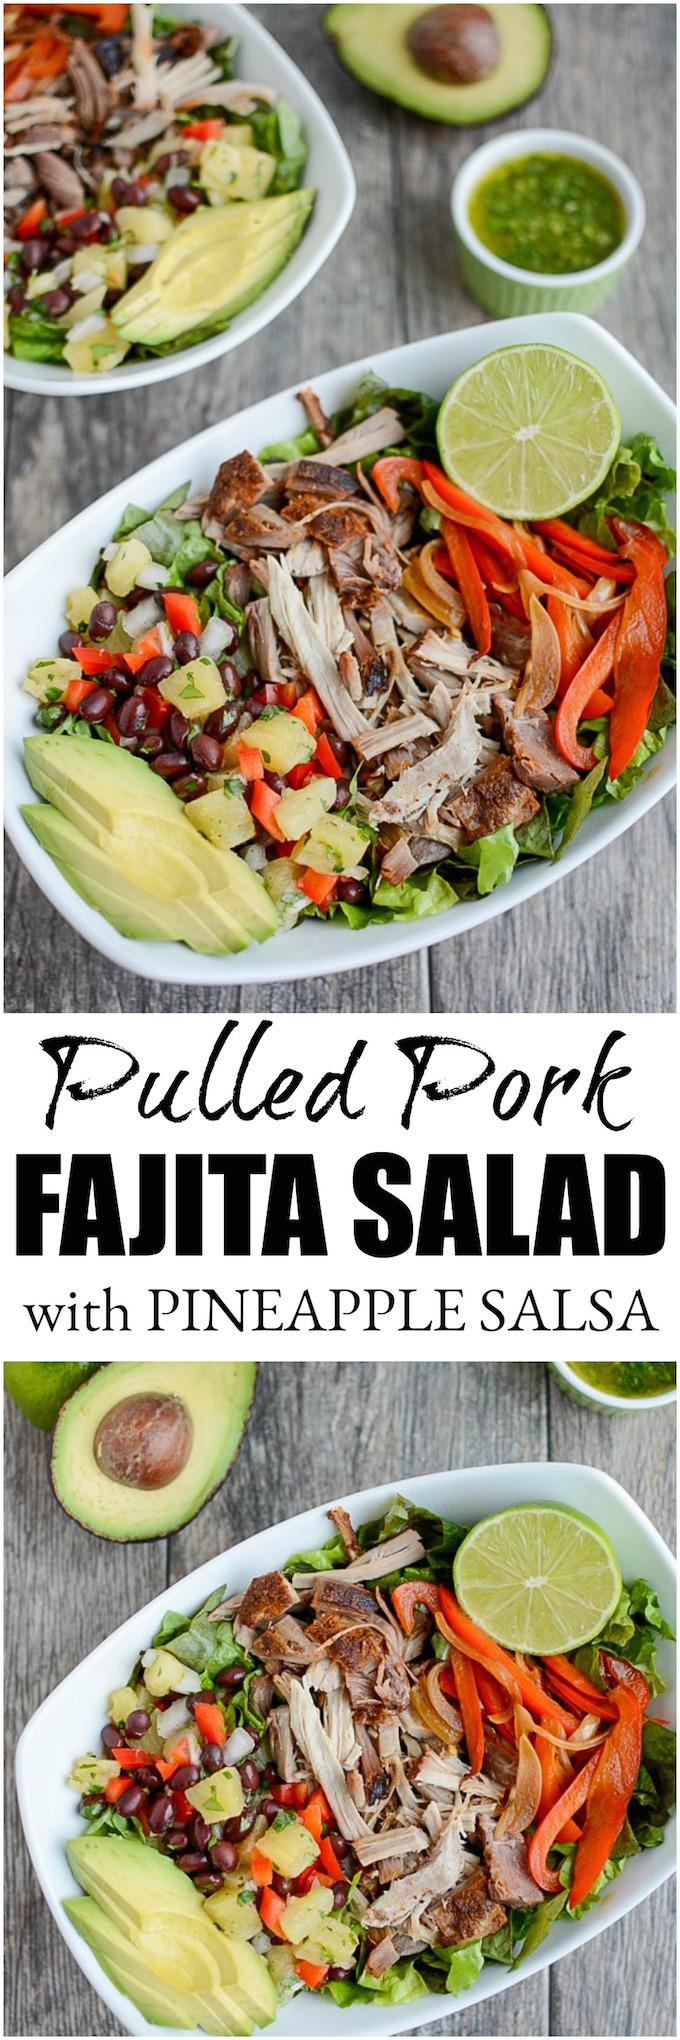 This Pulled Pork Fajita Salad is the perfect way to transform leftover pulled pork into a healthy new lunch or dinner. A pineapple black bean salsa and a light cilantro-lime dressing add extra flavor!